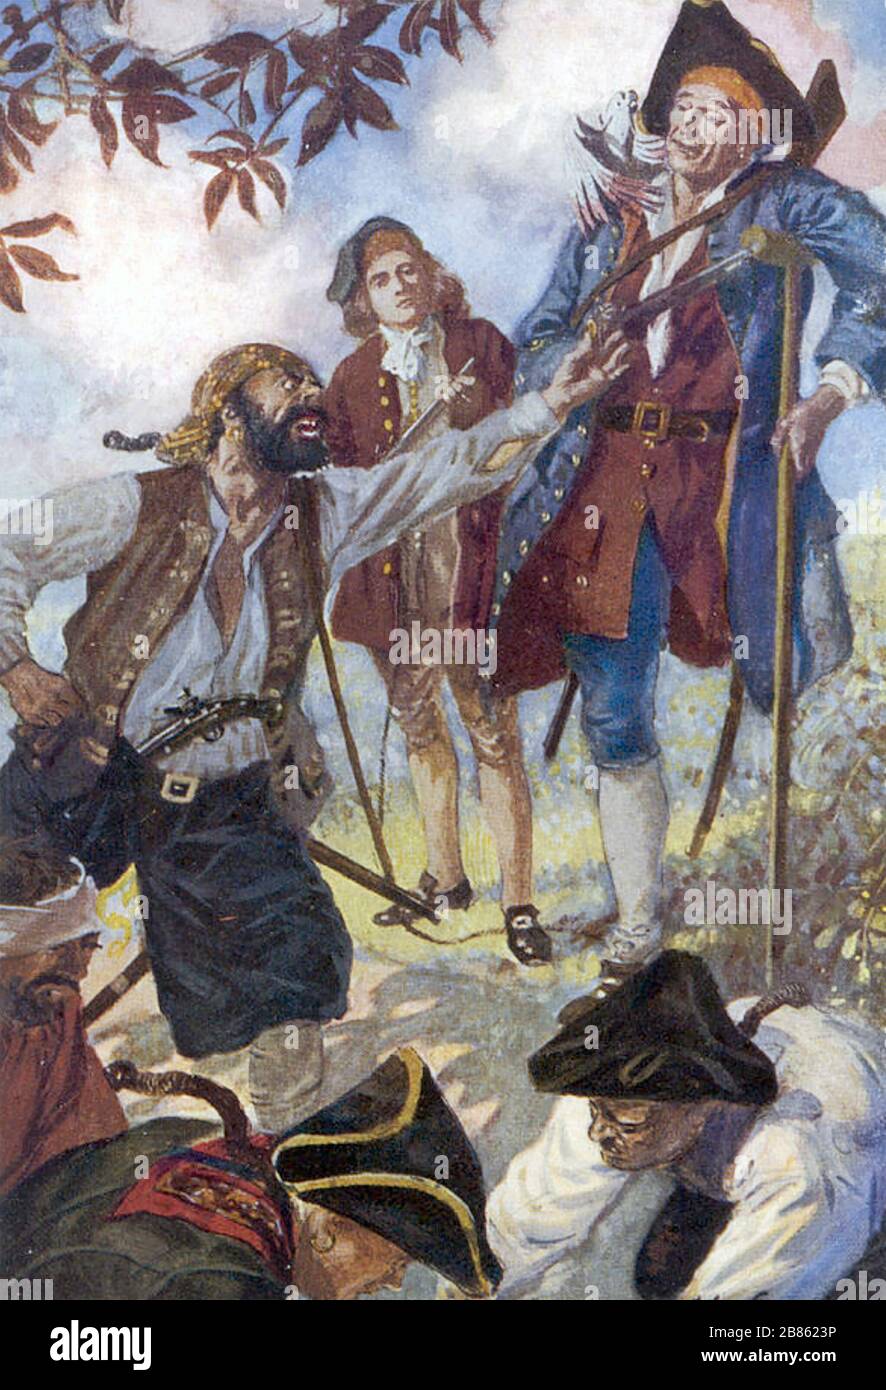 TREASURE ISLAND 1883 novel by Robert Louis Stevenson.  George Merry and his pirates find the treasure has gone as Long John Silver watches in amusement, Stock Photo